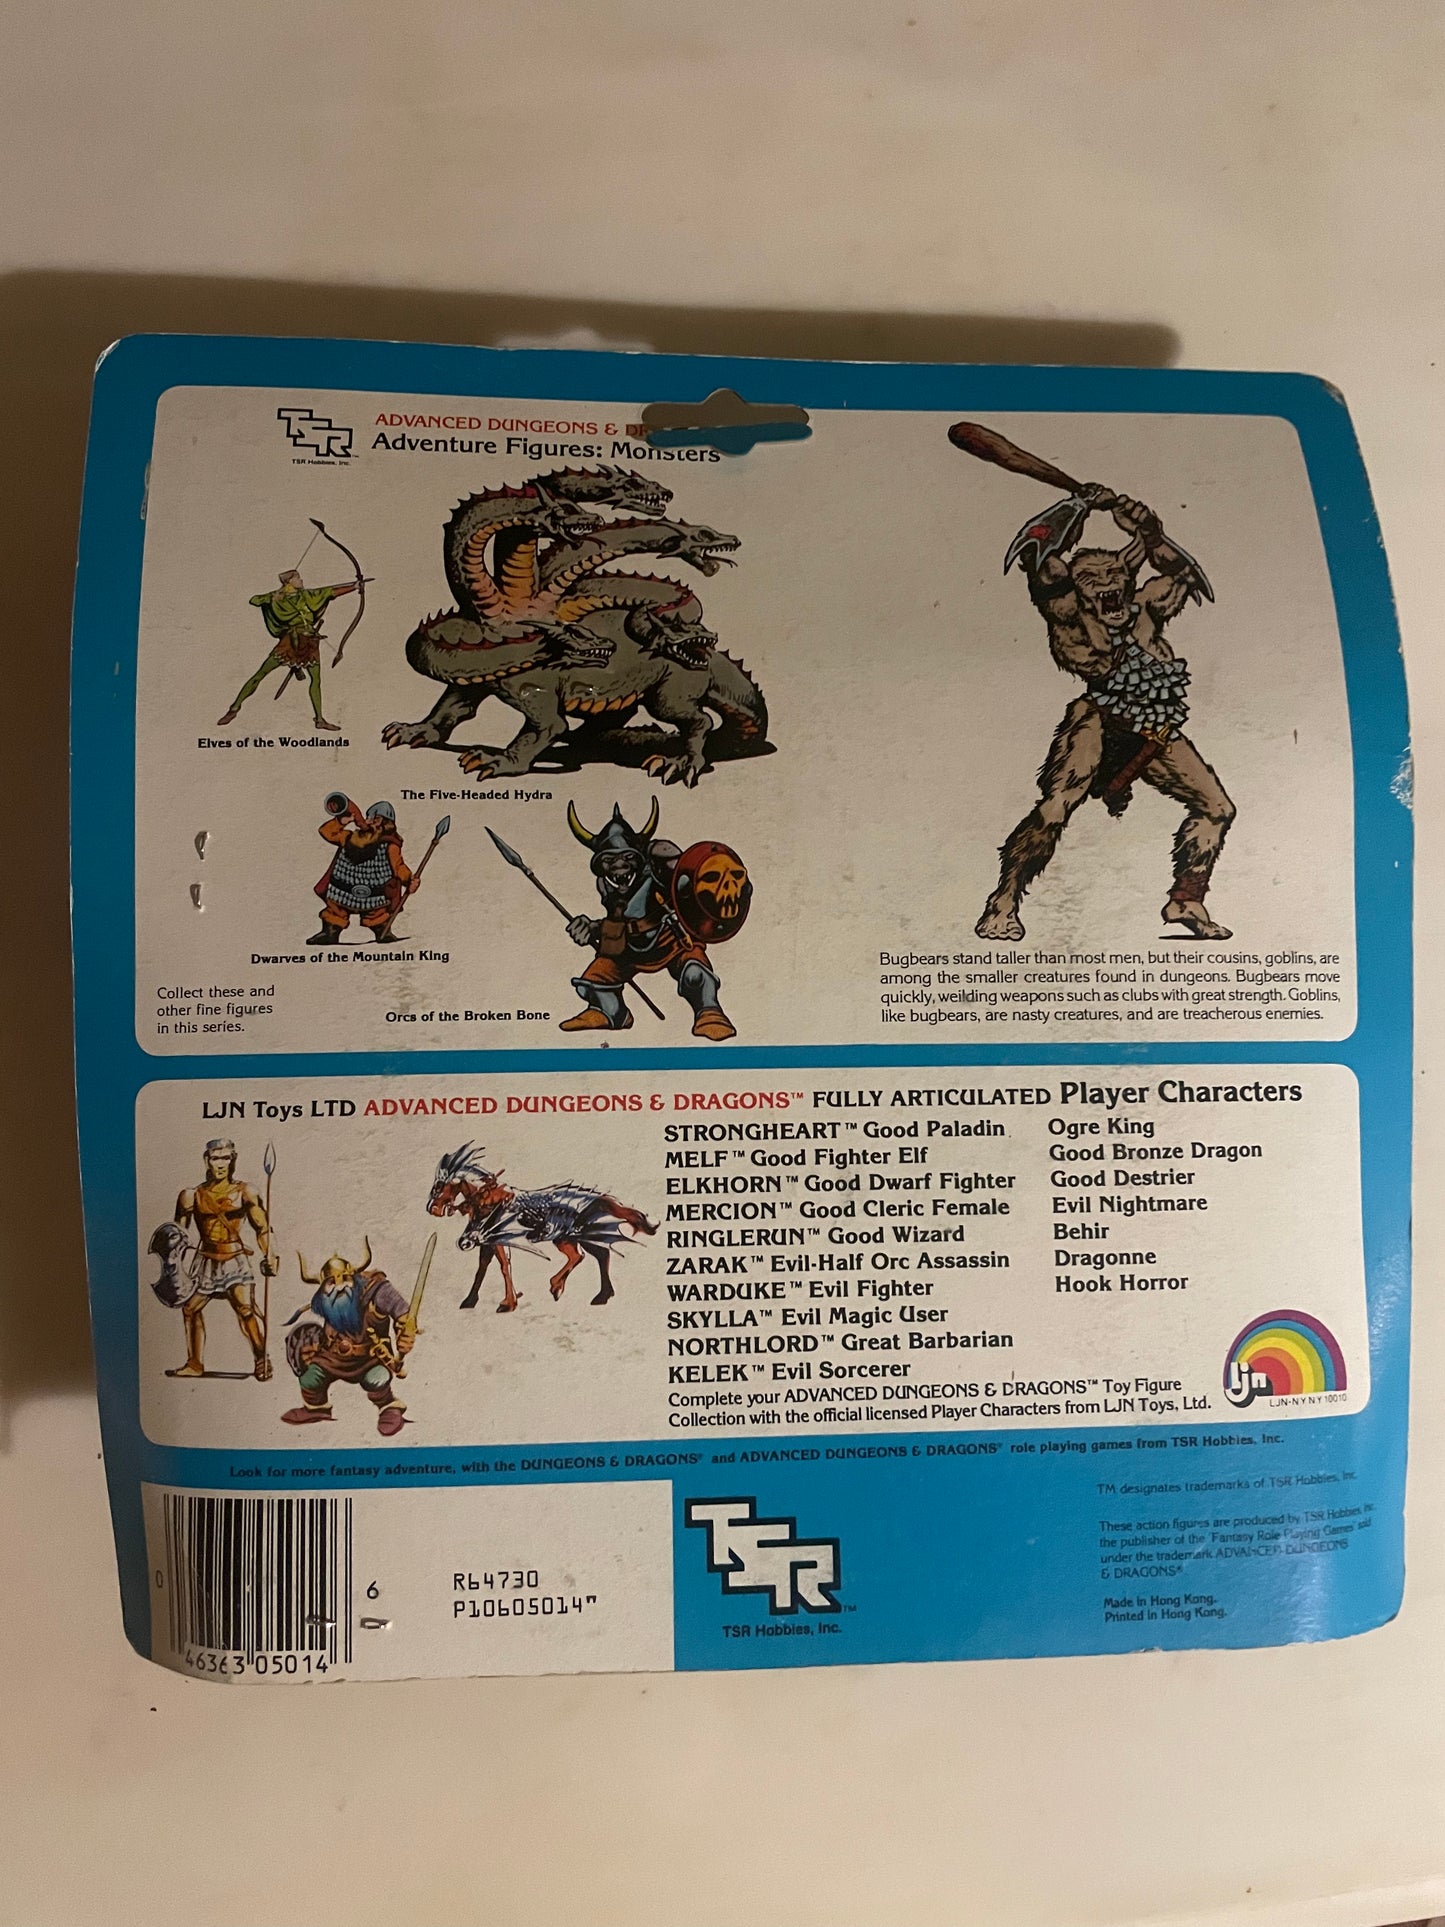 AD&D Bugbear and Goblin evil monster adventure figures